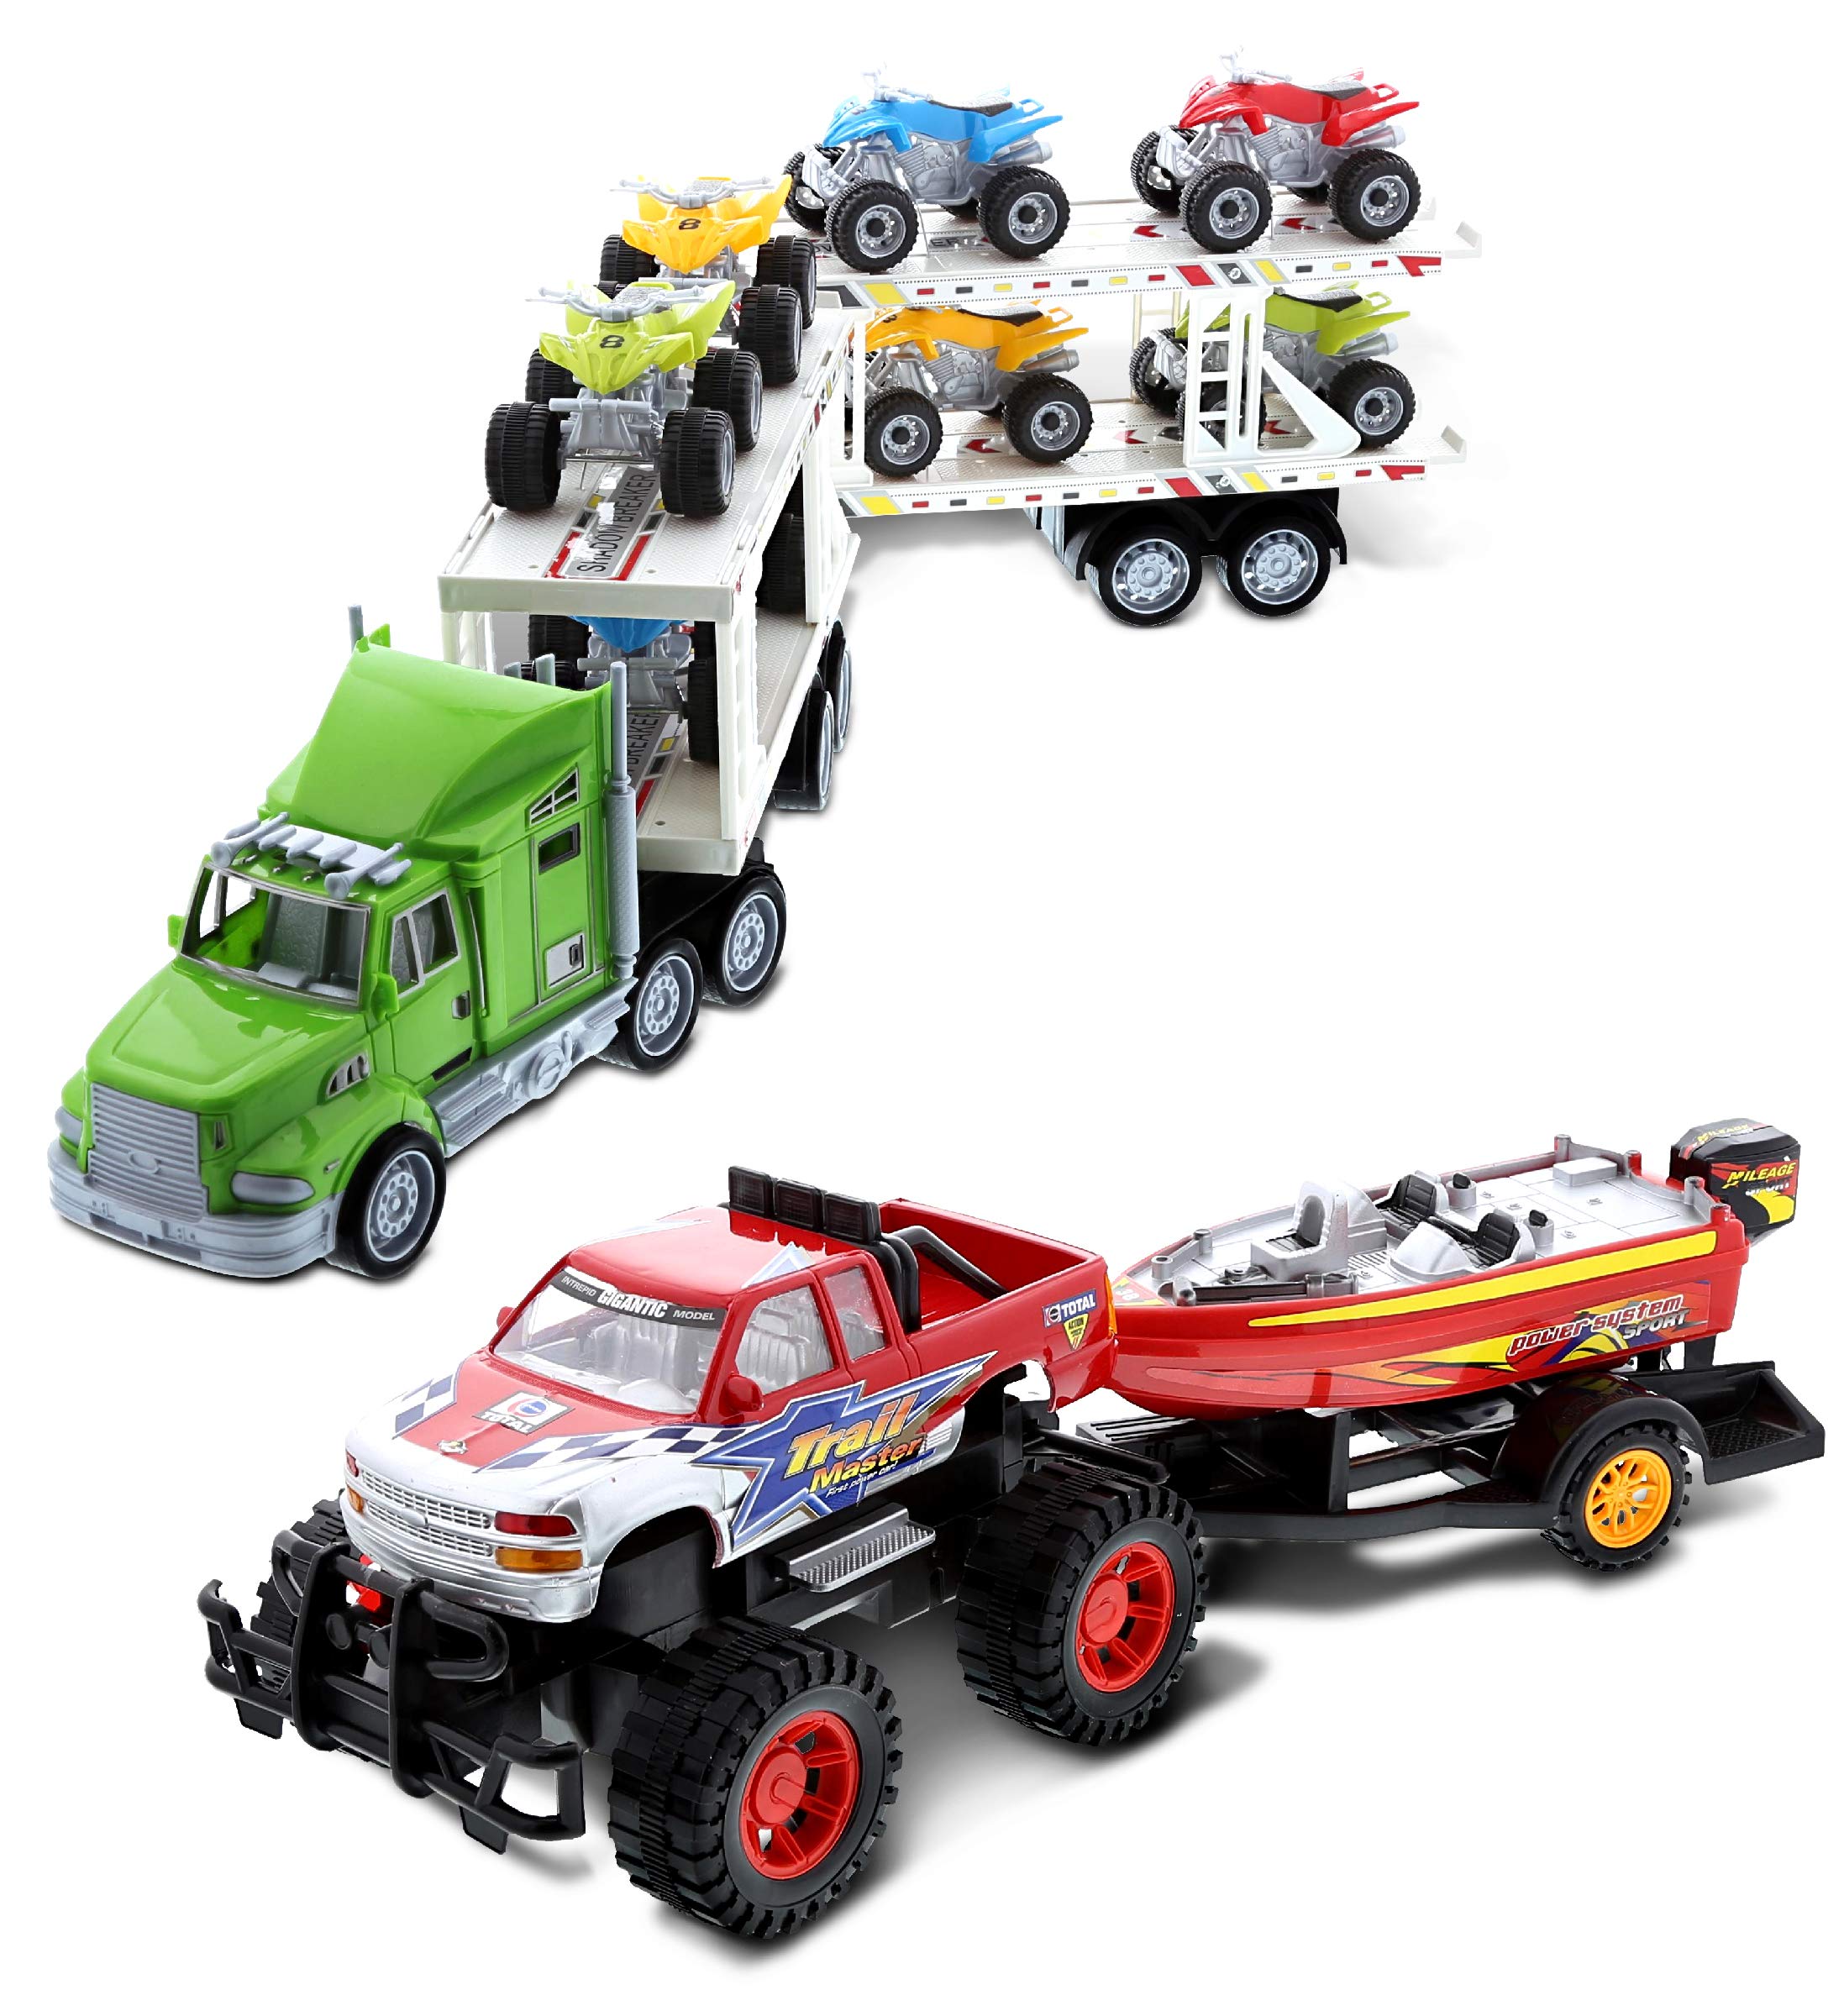 Mozlly Bundle of Friction Powered Hauler ATVs or Monster Trucks car carrier Playset & Monster Truck with Speed Boat Trailer Tran